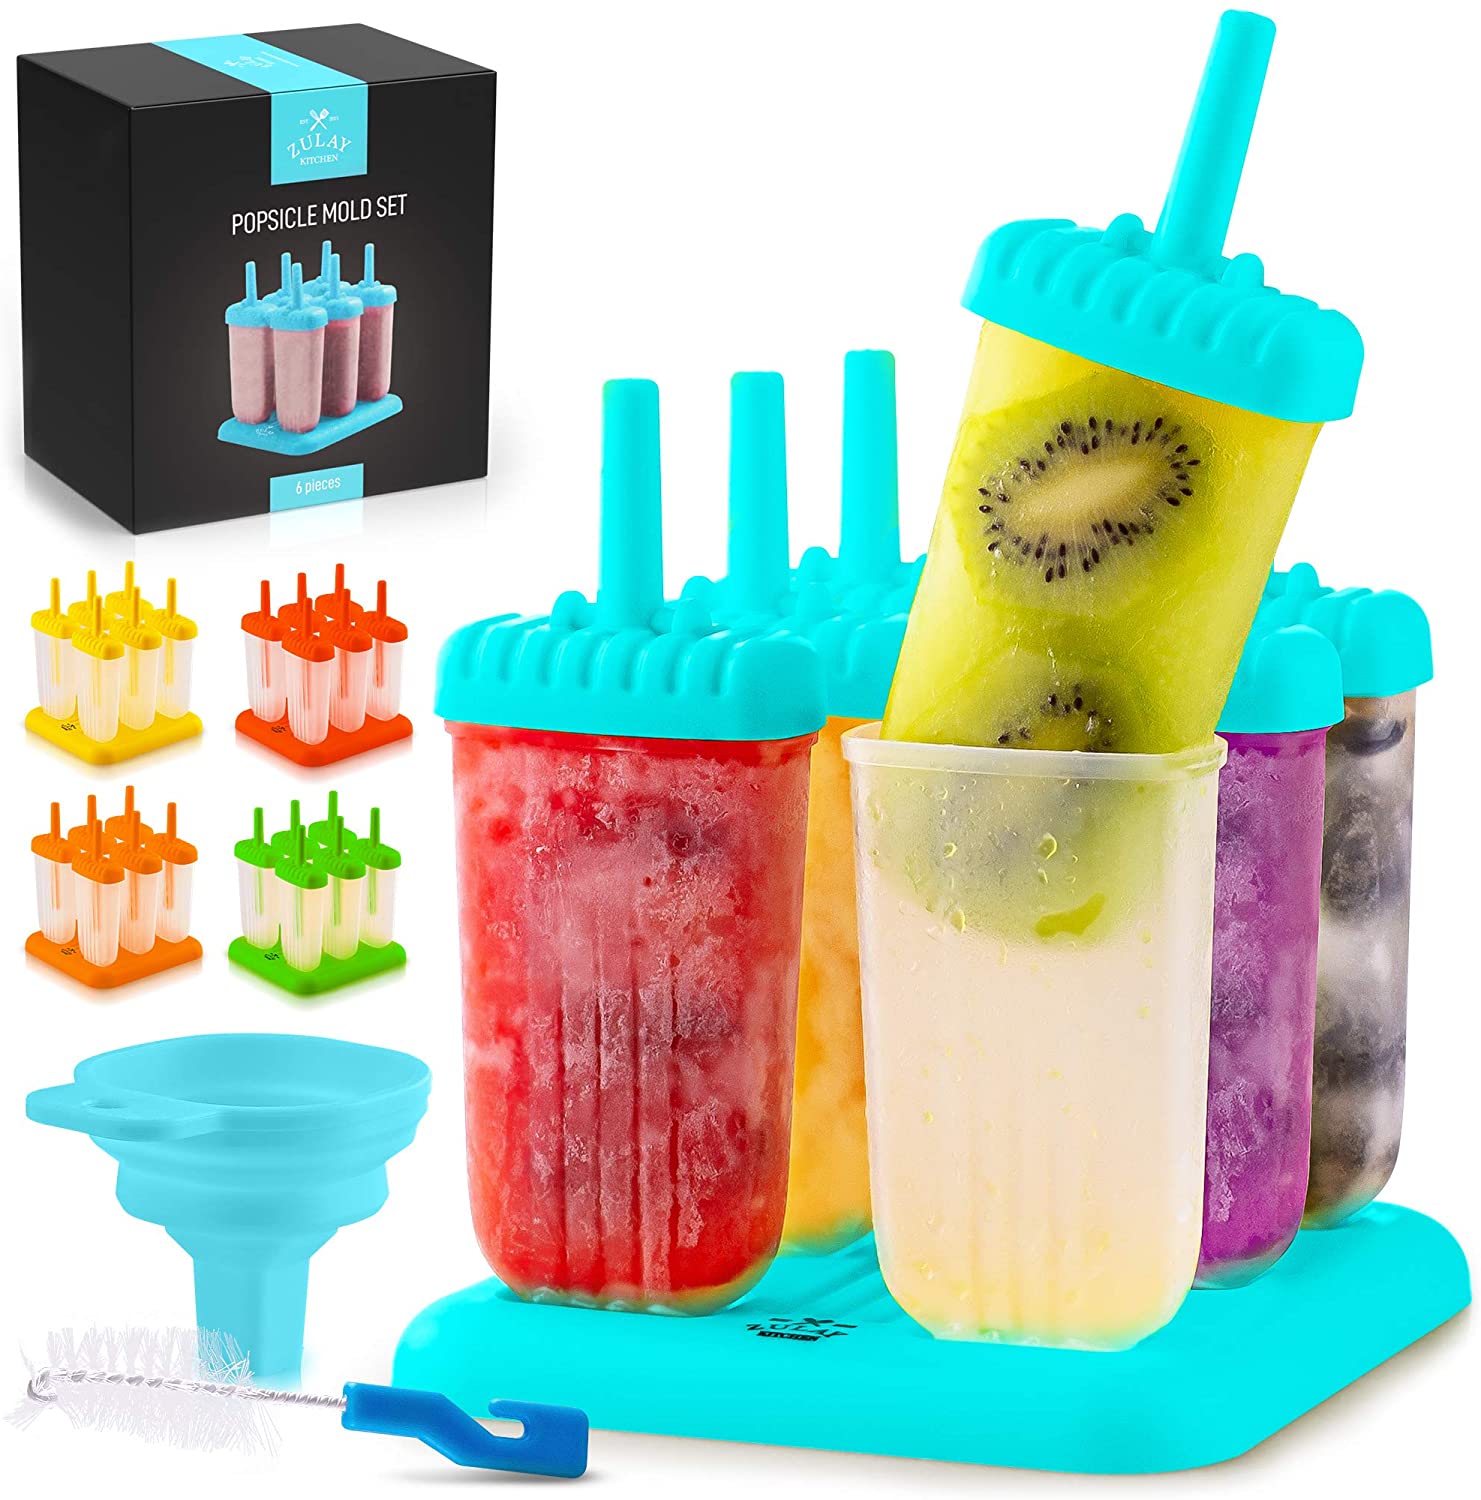 Popsicle Molds Set of 6 - BPA Free Reusable Molds - Zulay KitchenZulay Kitchen